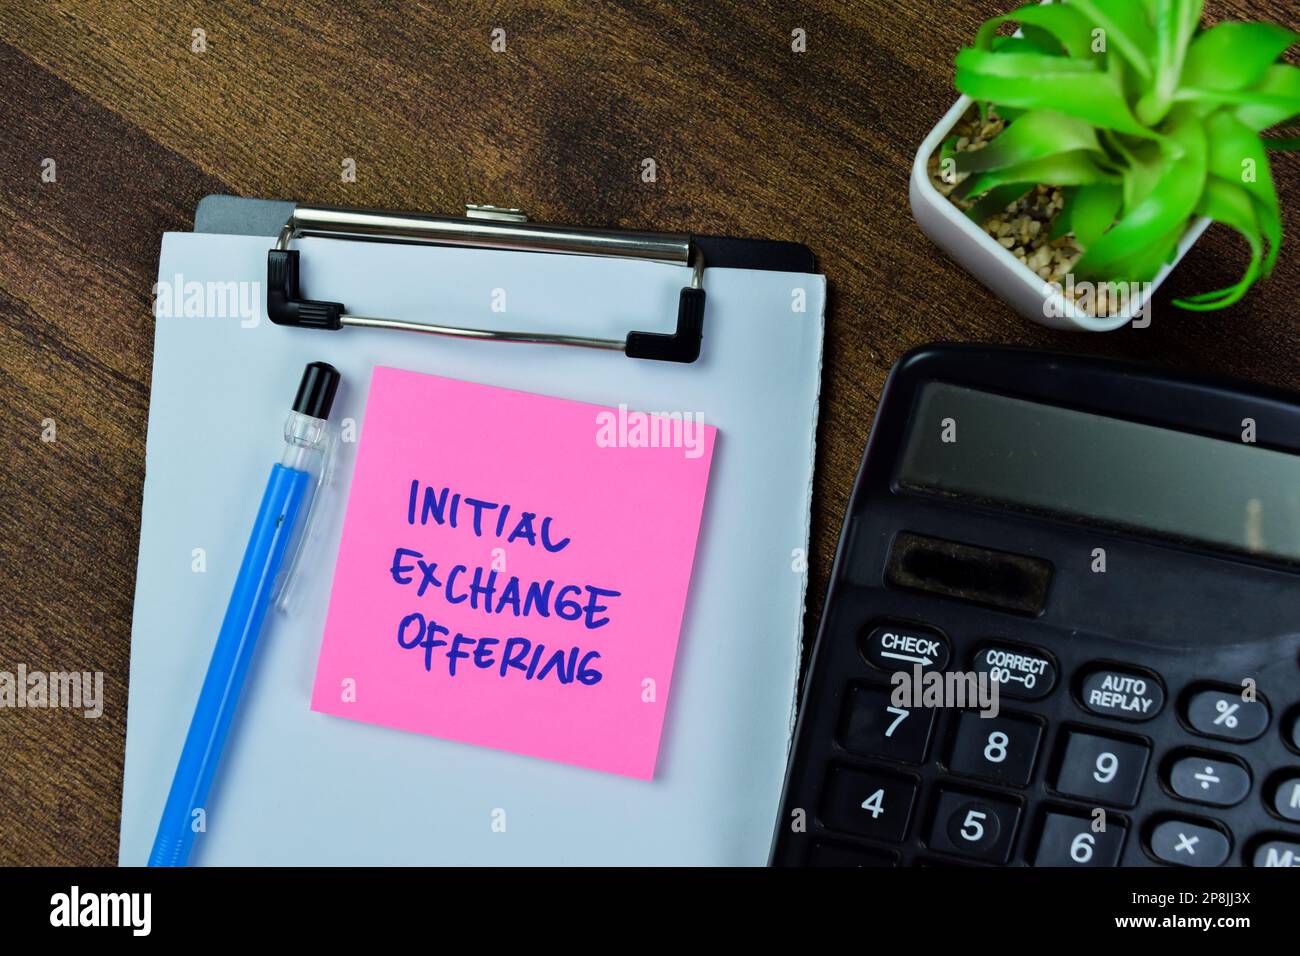 Concept of Initial Exchange Offering write on sticky notes isolated on Wooden Table. Stock Photo